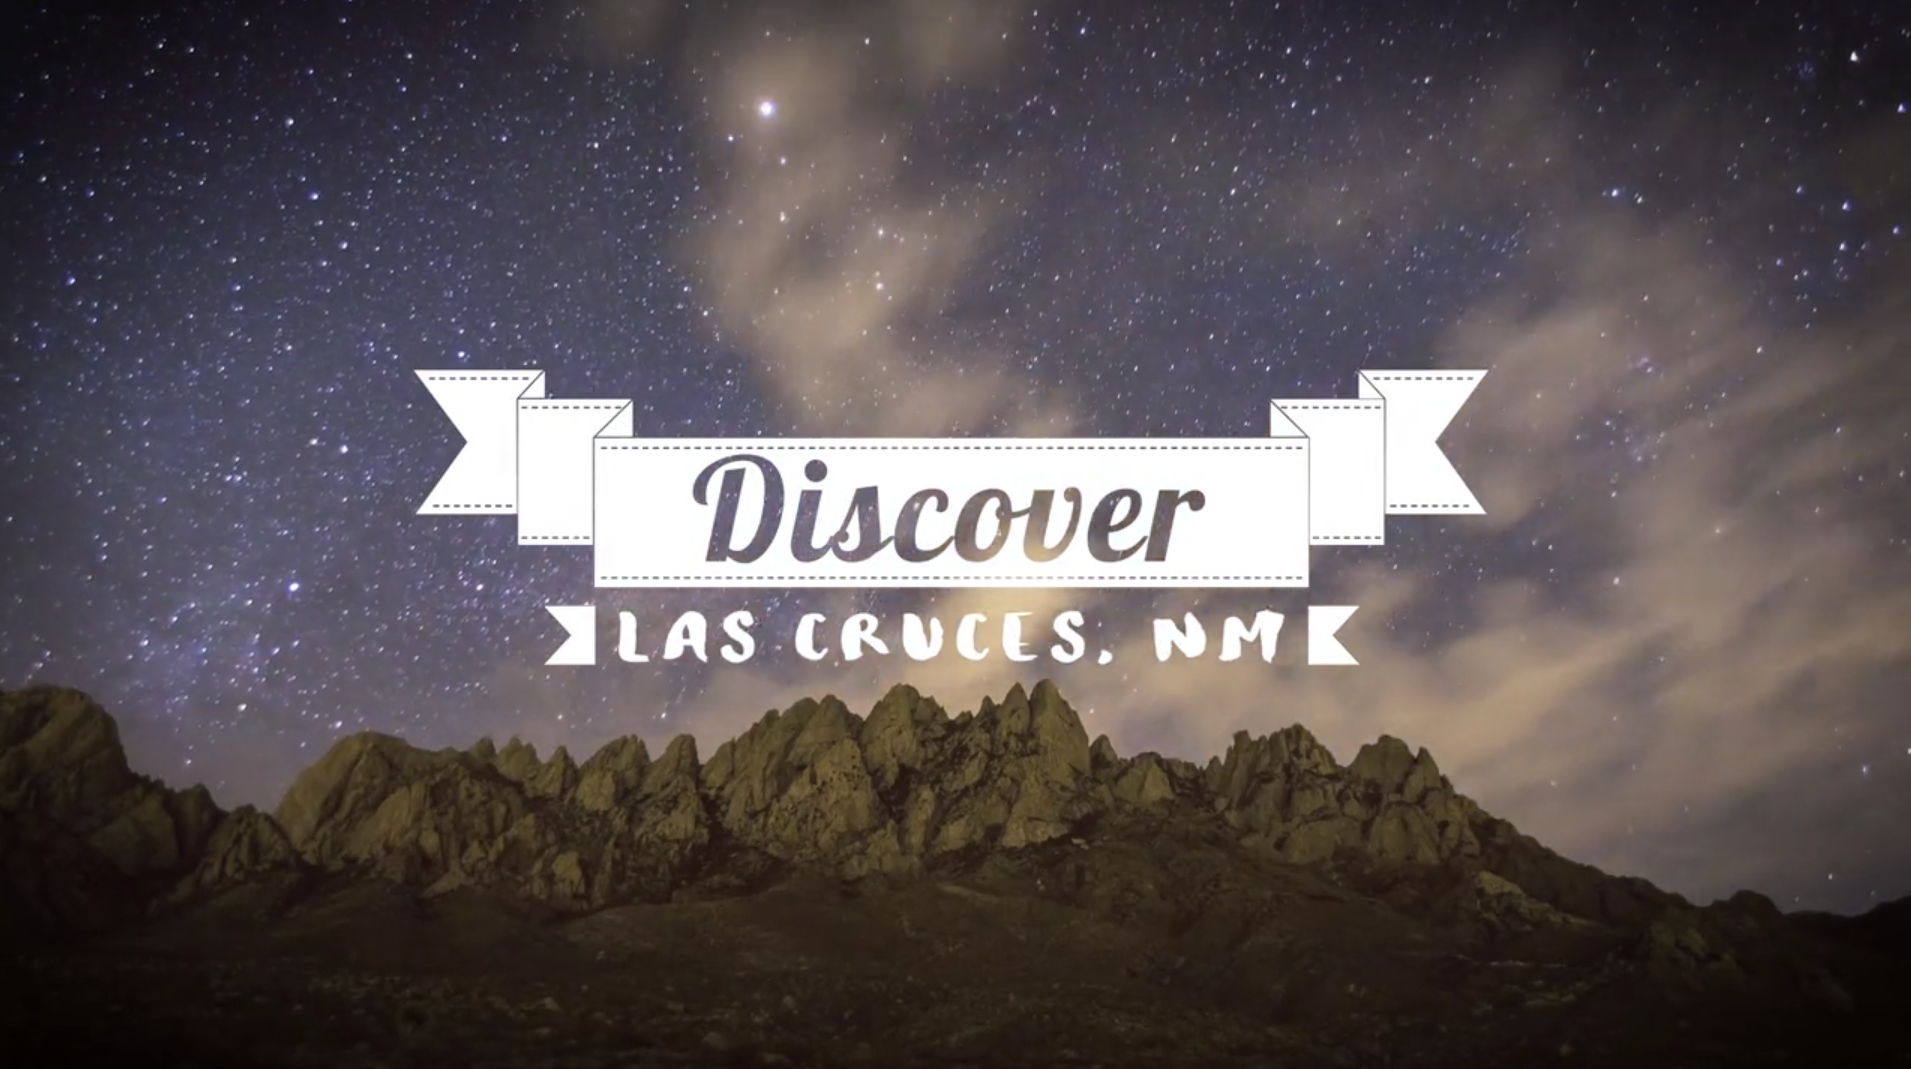 Discover Las Cruces